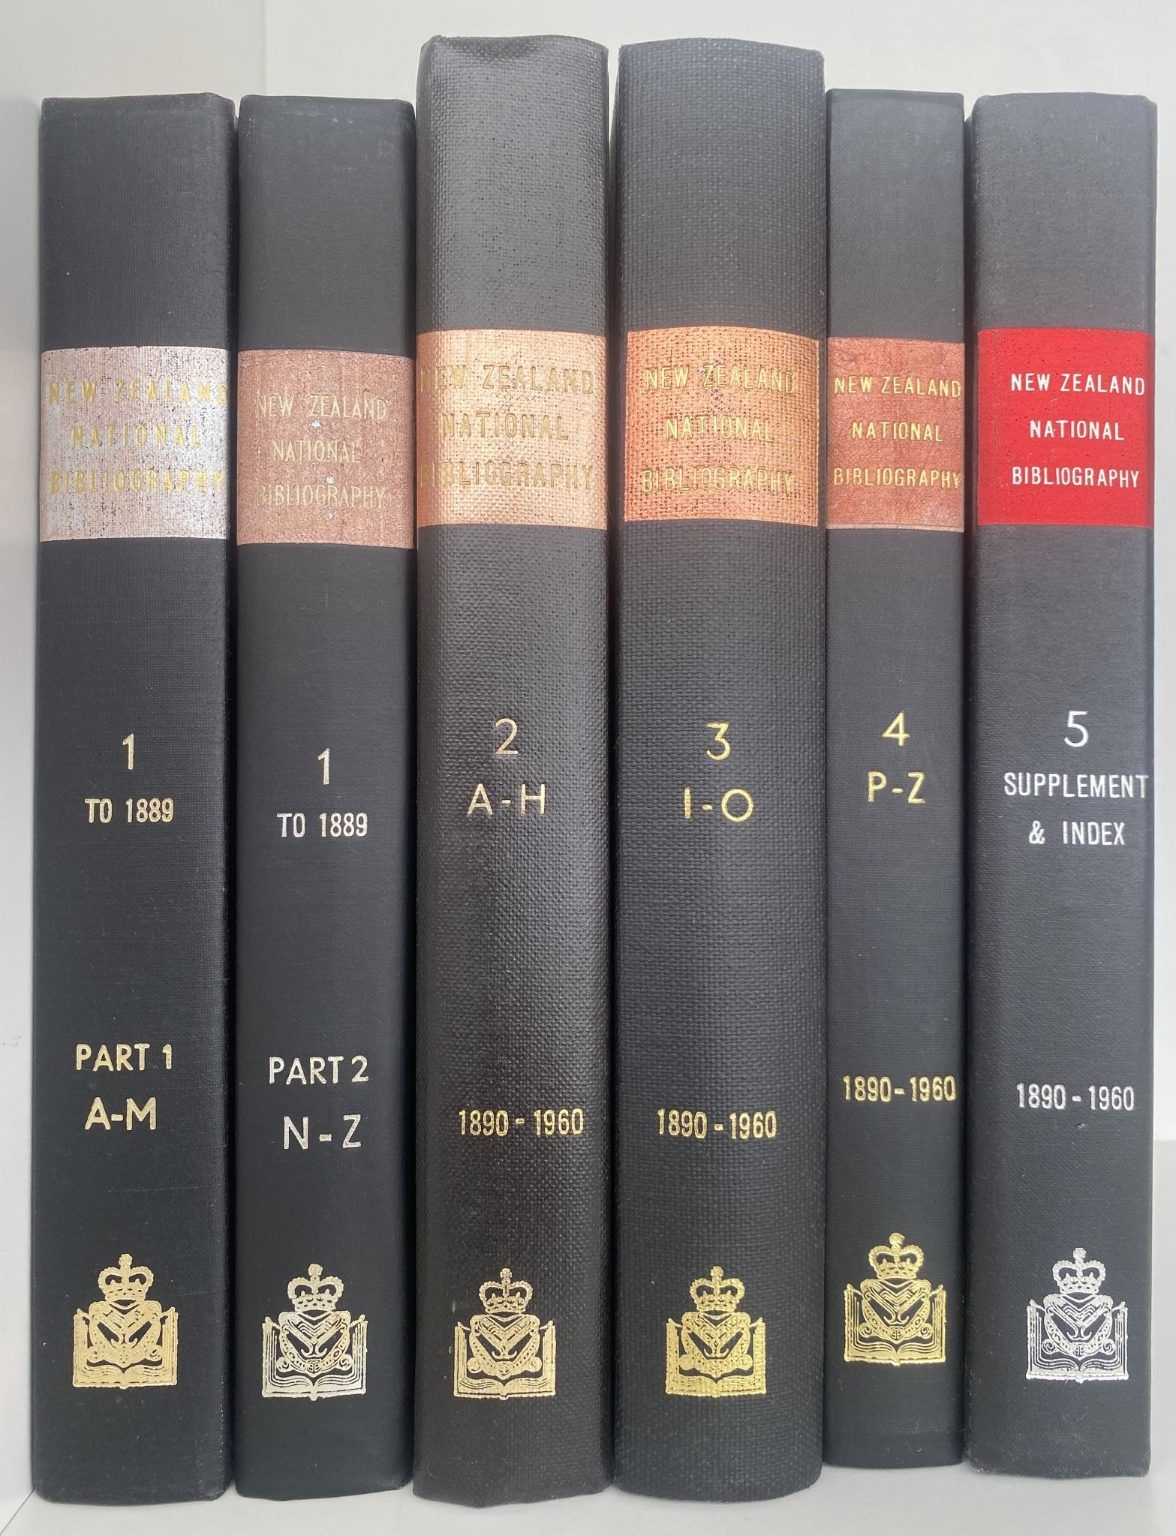 NEW ZEALAND NATIONAL BIBLIOGRAPHY: To the Year 1960 - Complete set 6 books